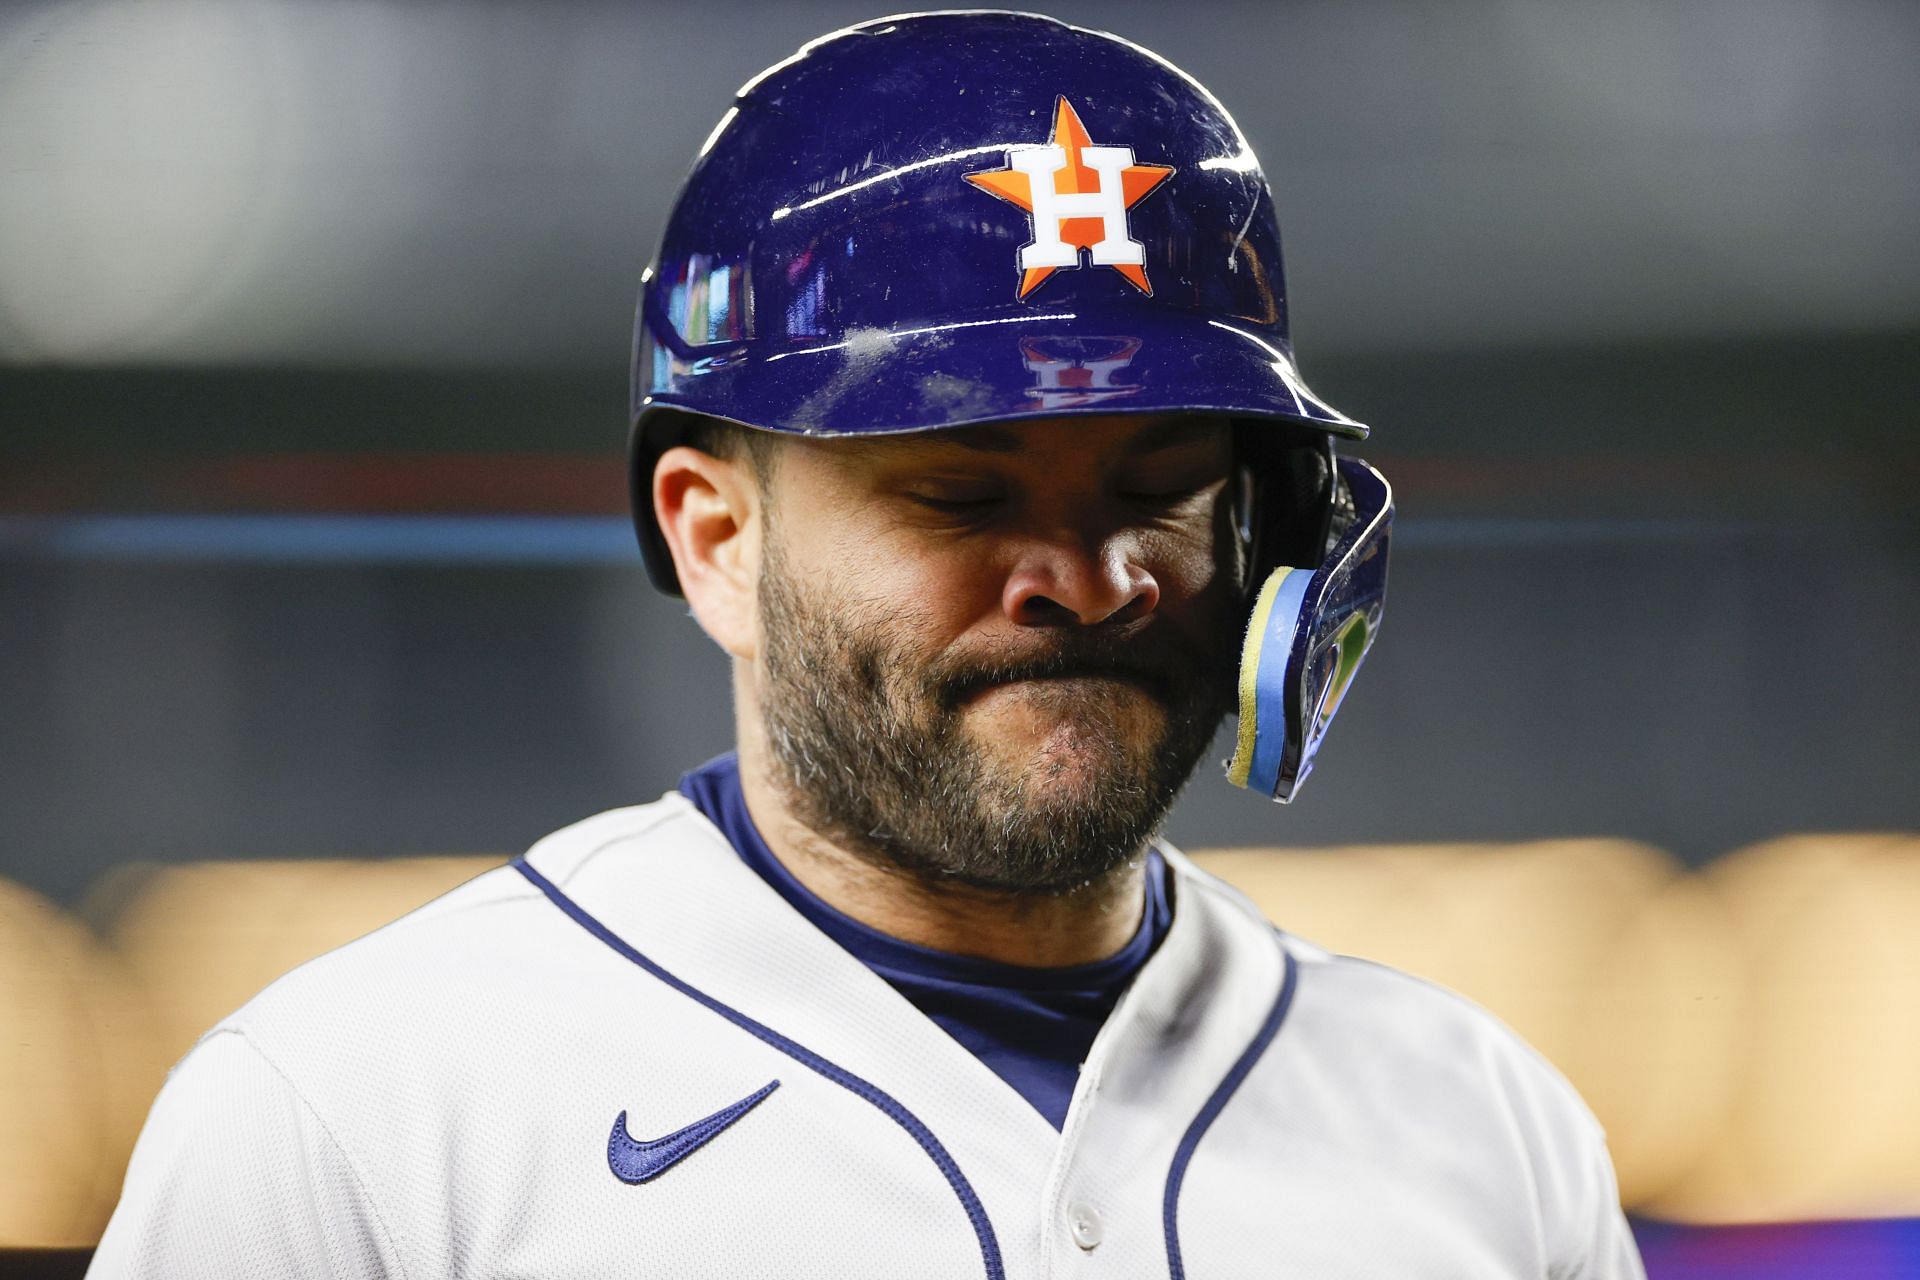 Jose Altuve in 2019: I'm too shy. But last time they did that, I got in  trouble with my wife